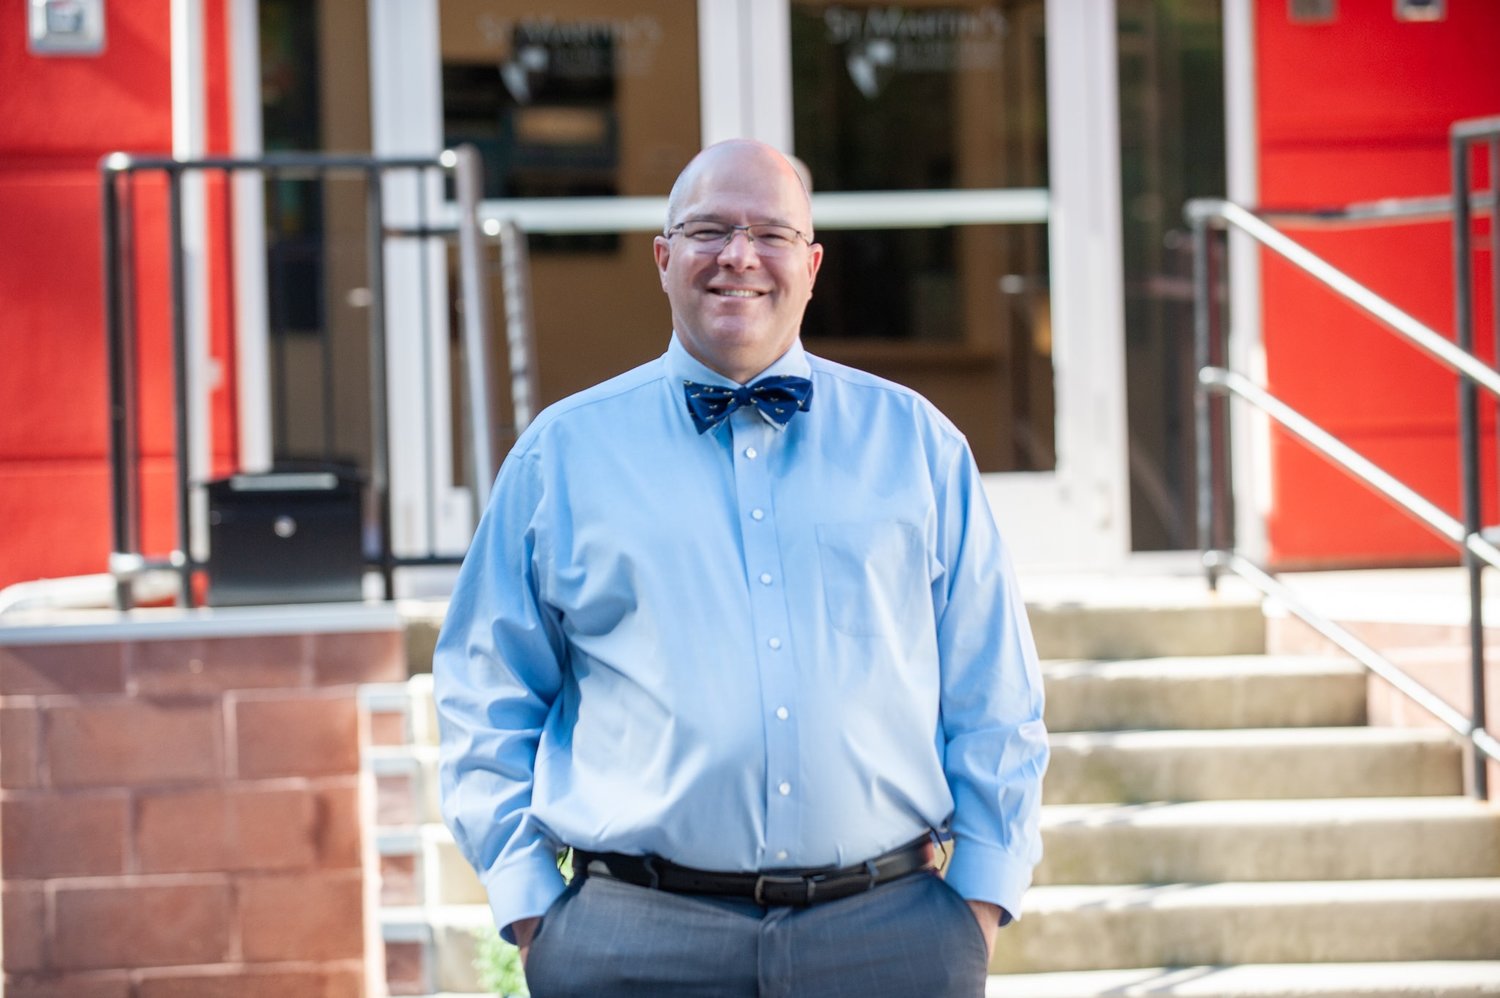 Tony Shaffer is overseeing the well-being of nearly 300 students at St. Martin’s-in-the-Field.